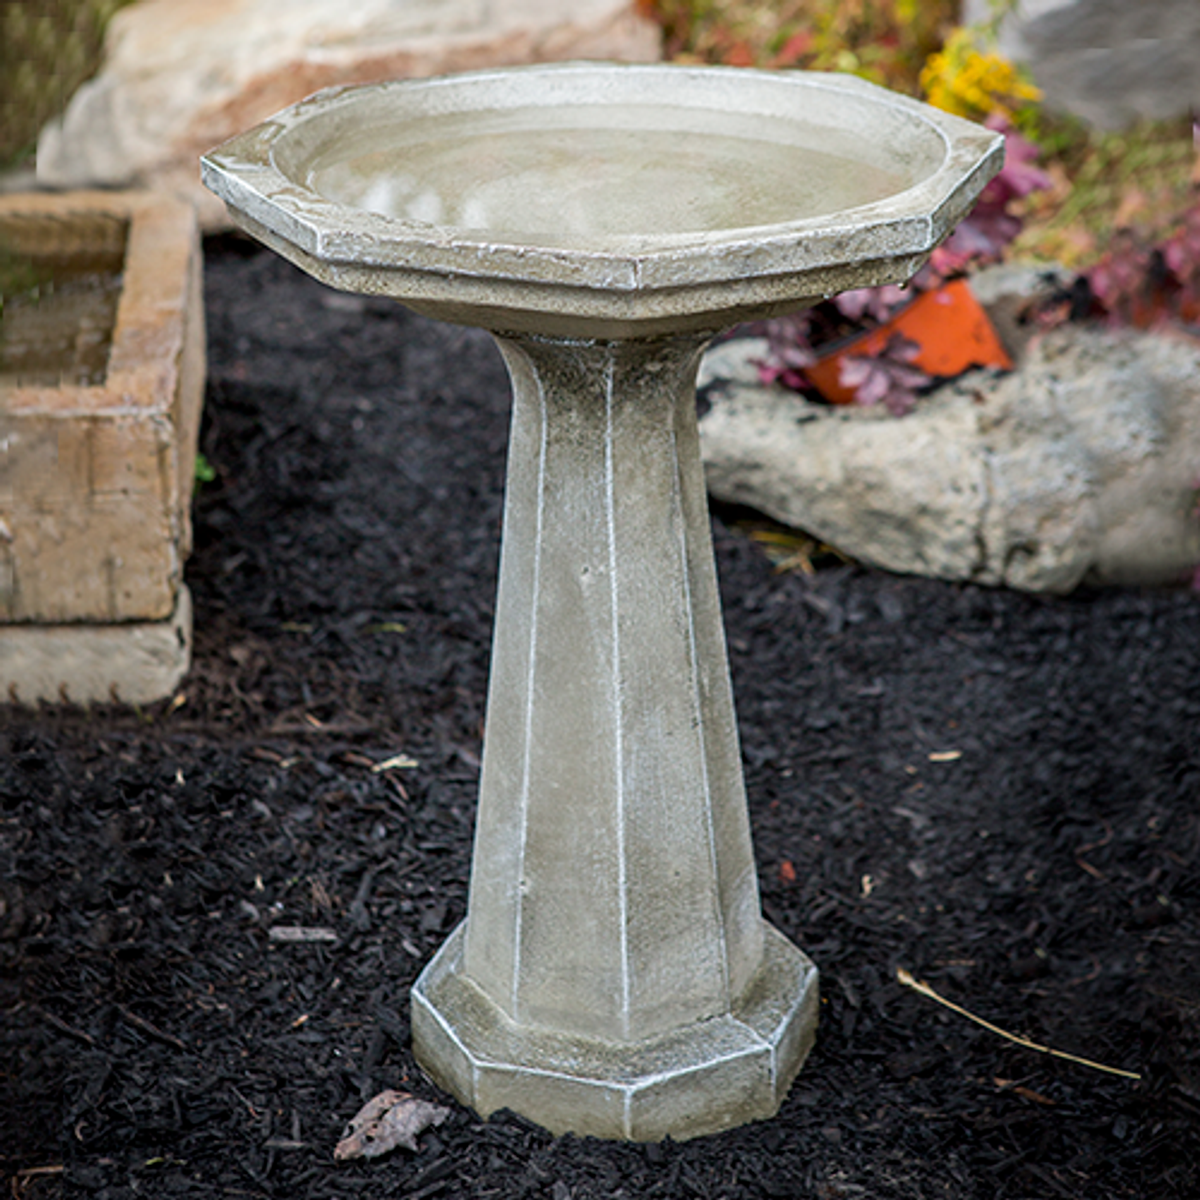 Hand sculpted outdoor decor large octagon birdbath from Athena Garden make wonderful Mother's Day and Christmas gifts. This cast stone concrete Birdbath is a unique design that has high quality and personality, decorative garden birdbath, stone birdbath gifts for all occasions.  concrete bird bath, athena garden birdbath, sculpted, Large Octagon bird bath, contemporary one piece bird bath, modern one piece bird bath, modern birdbath, concrete staturary